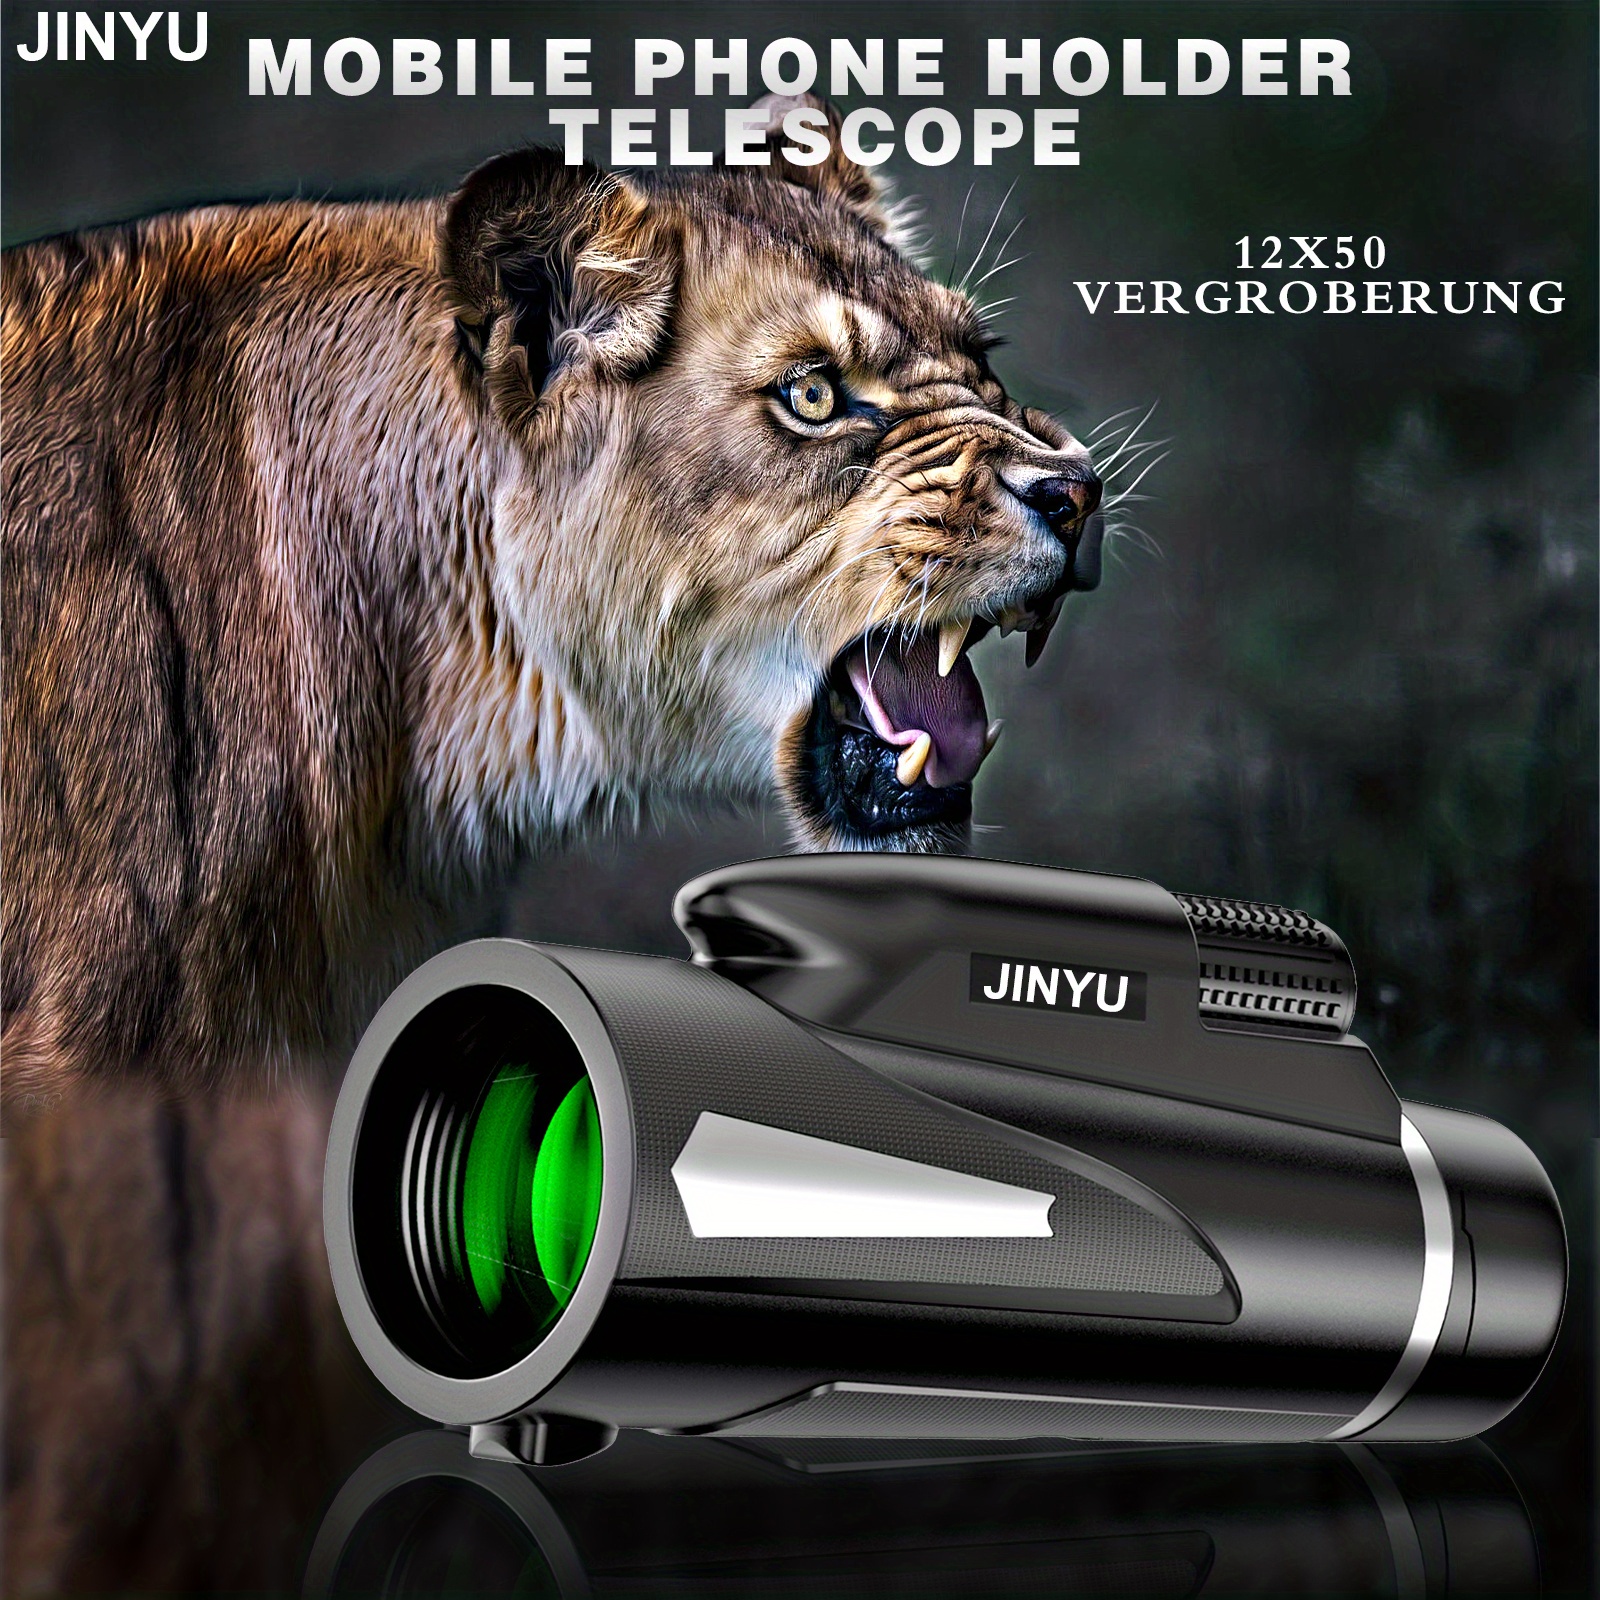 jinyu new high end 12x50 adult hd monocular with smartphone adapter tripod hand strap lightweight high power bak4 prism and fmc lens monocular for bird watching camping hunting hiking traveling details 0